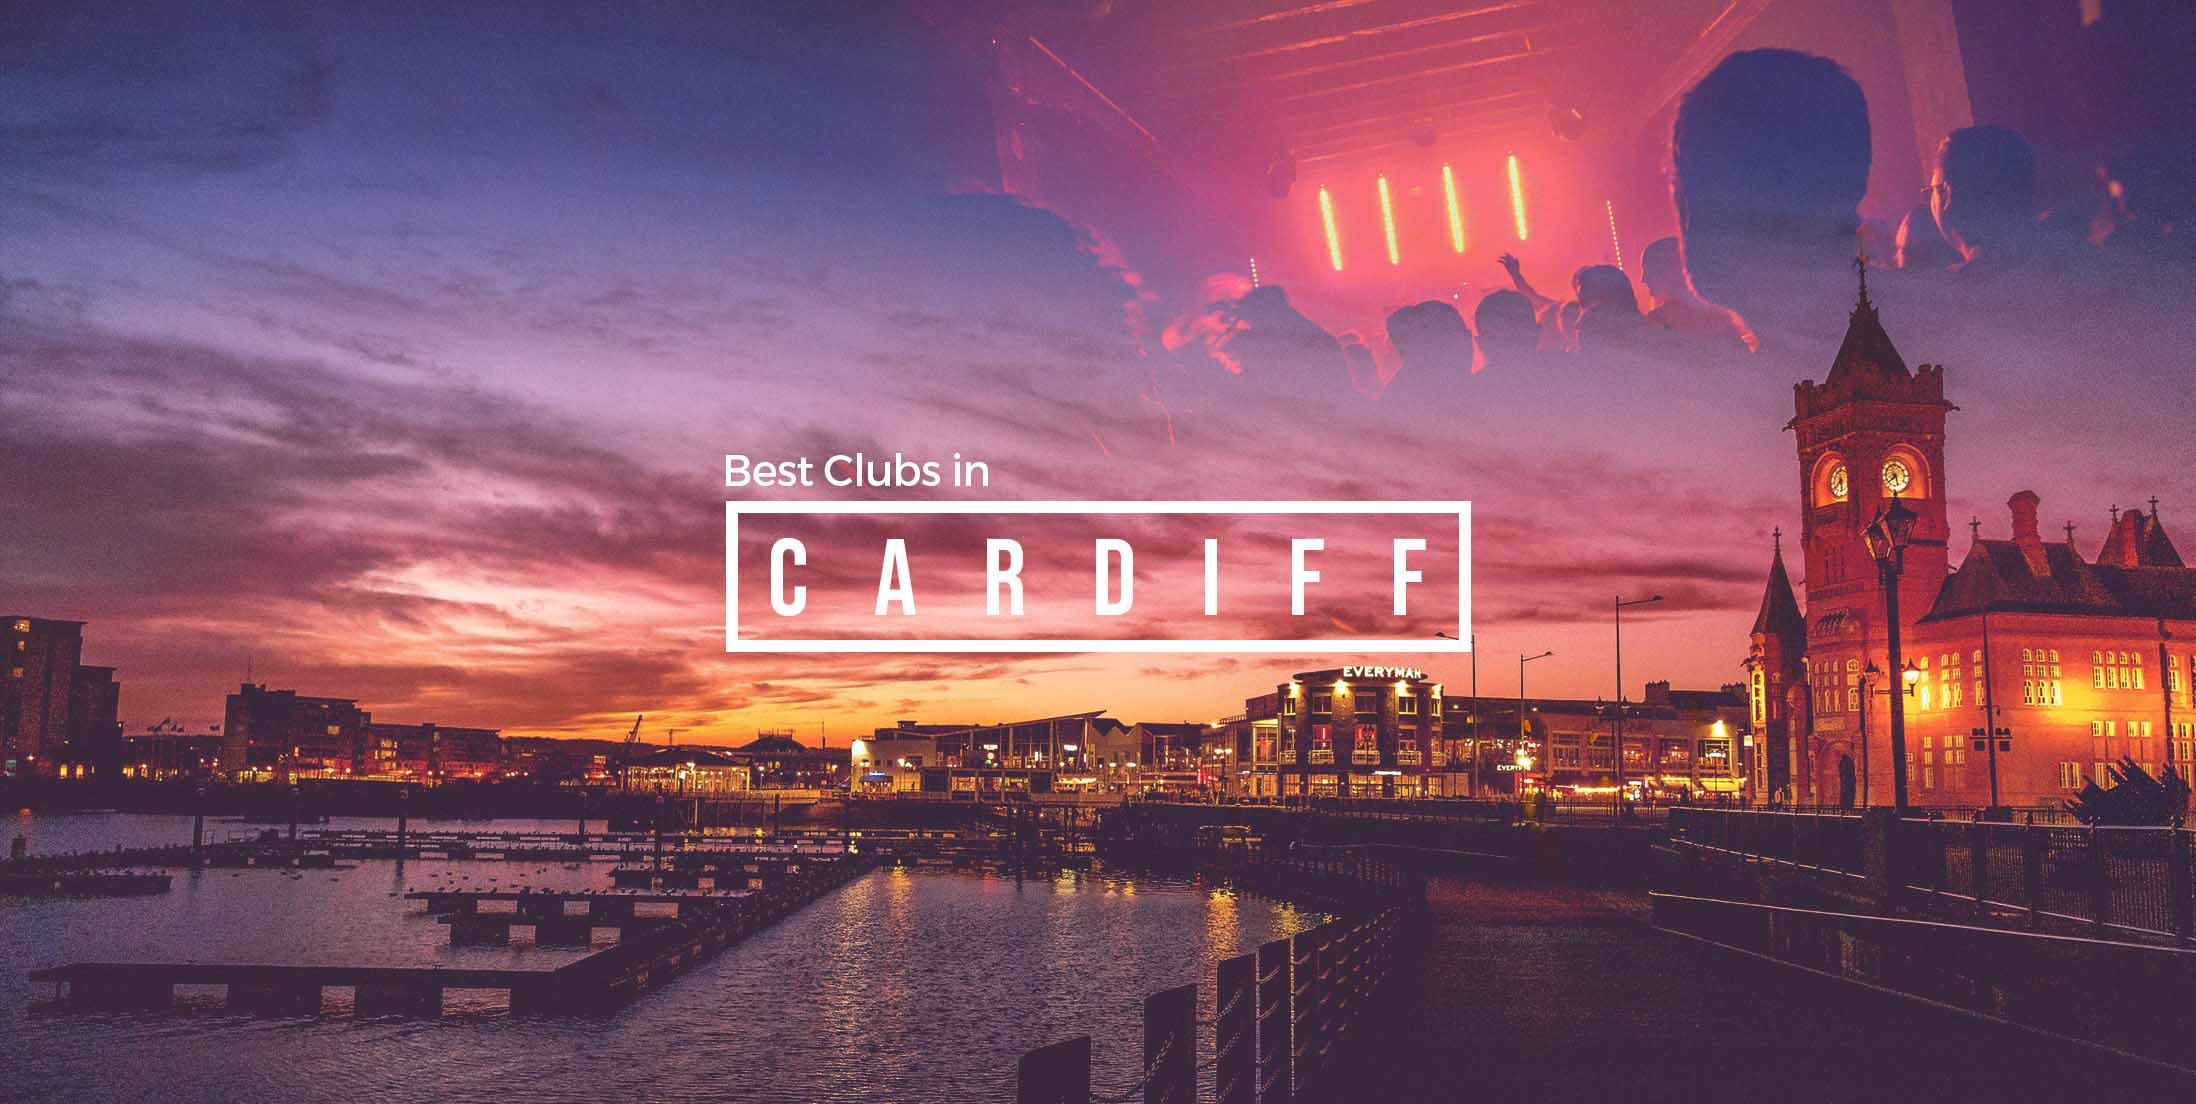 Best Clubs in Cardiff